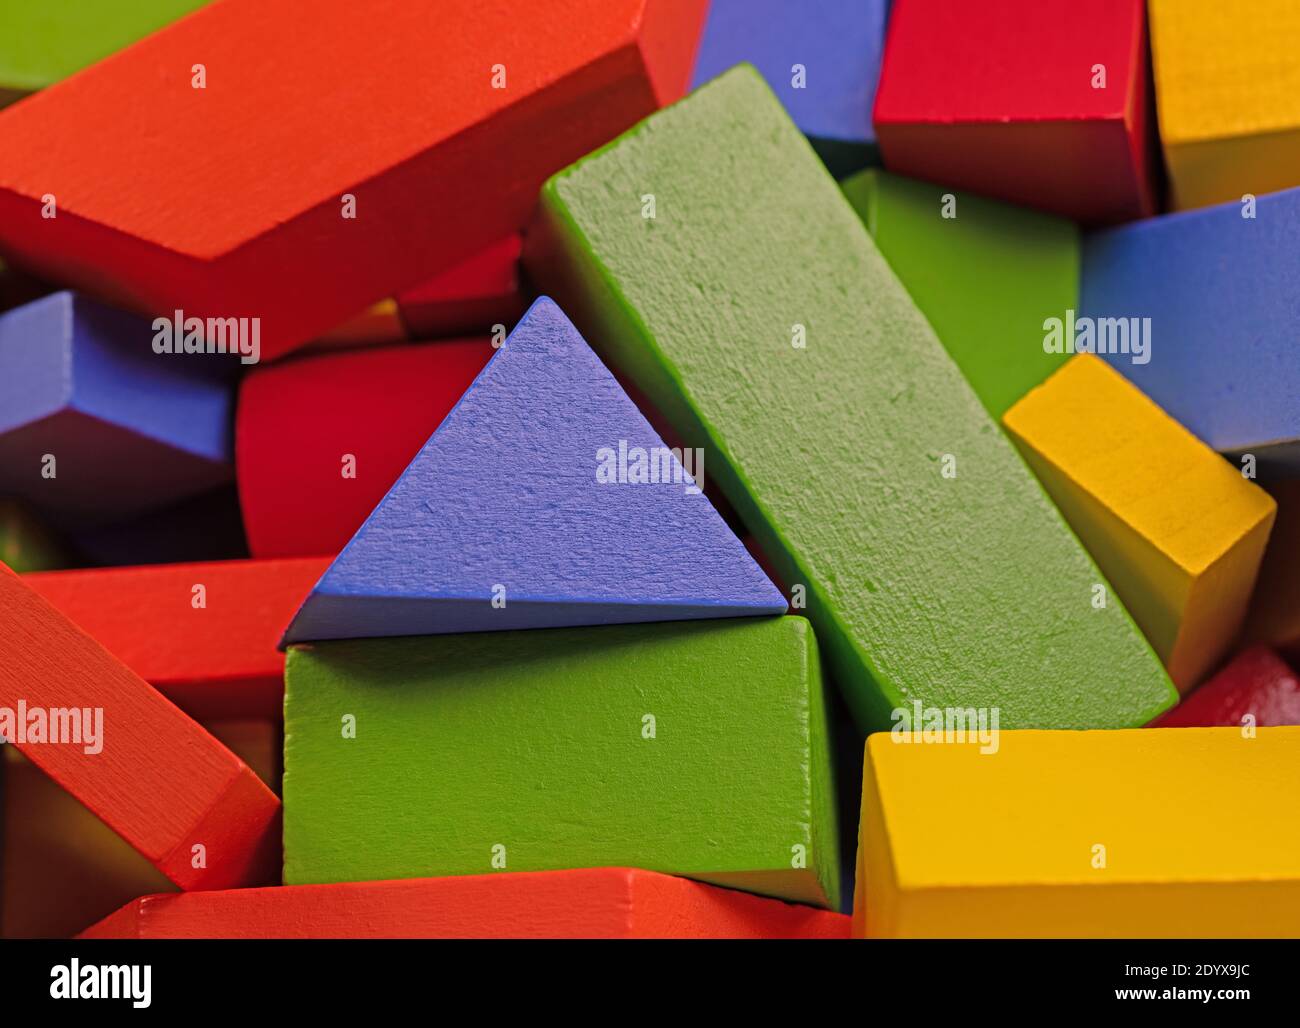 Lots of colorful wooden building blocks Stock Photo